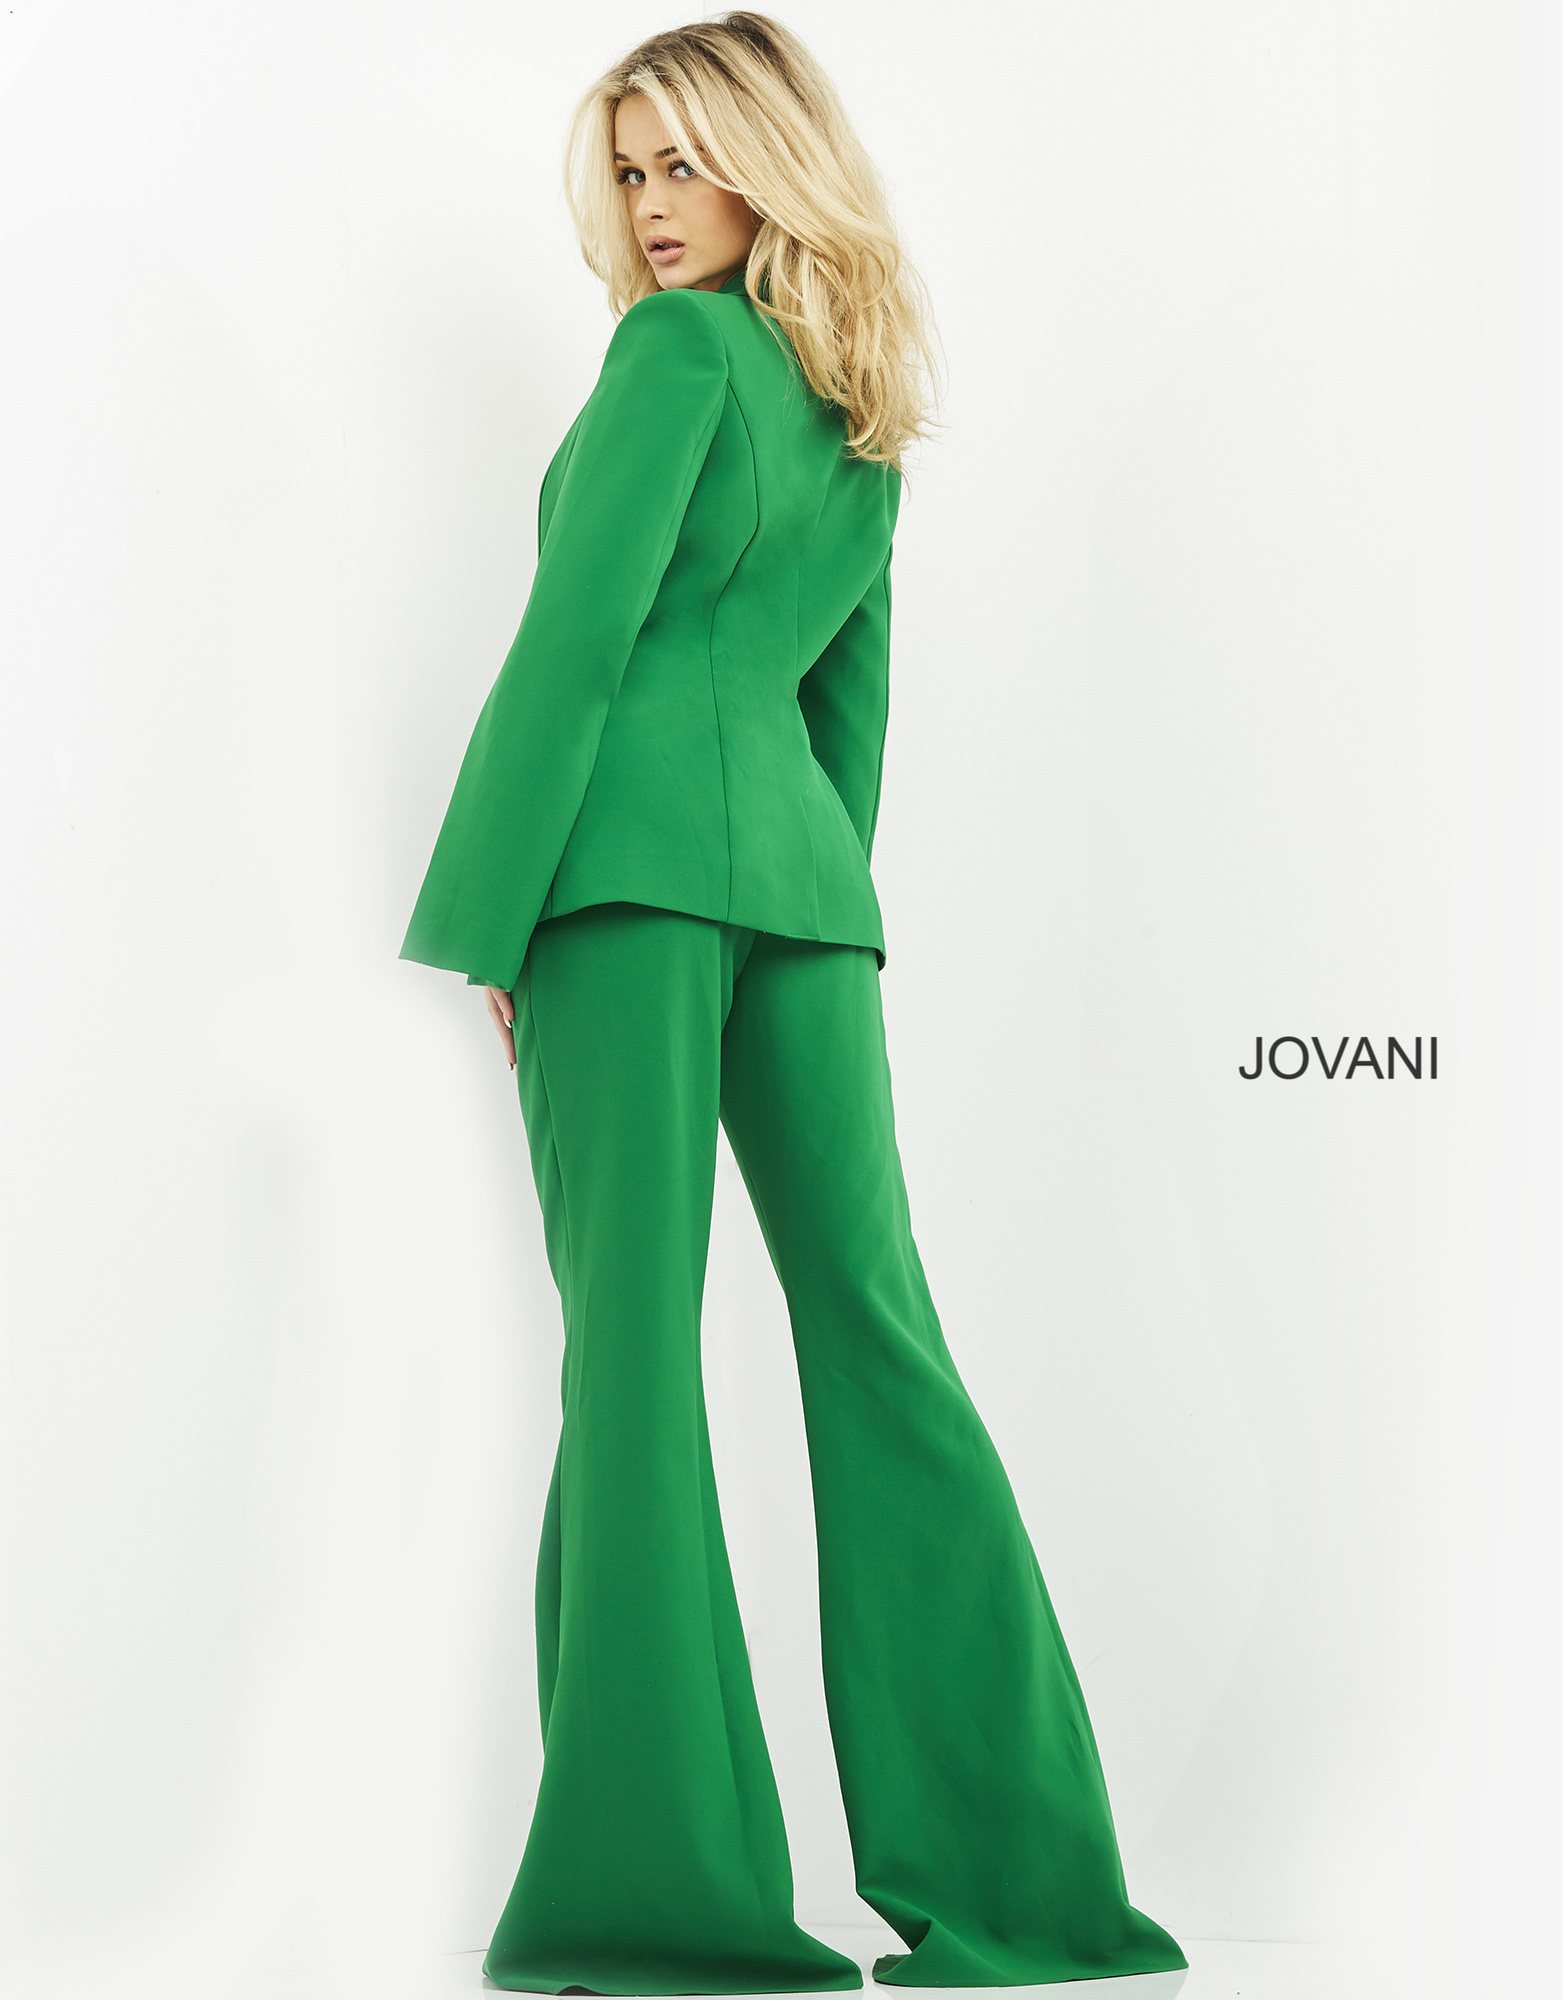 Jovani 06922 Emerald Single Breasted Contemporary Pant Suit